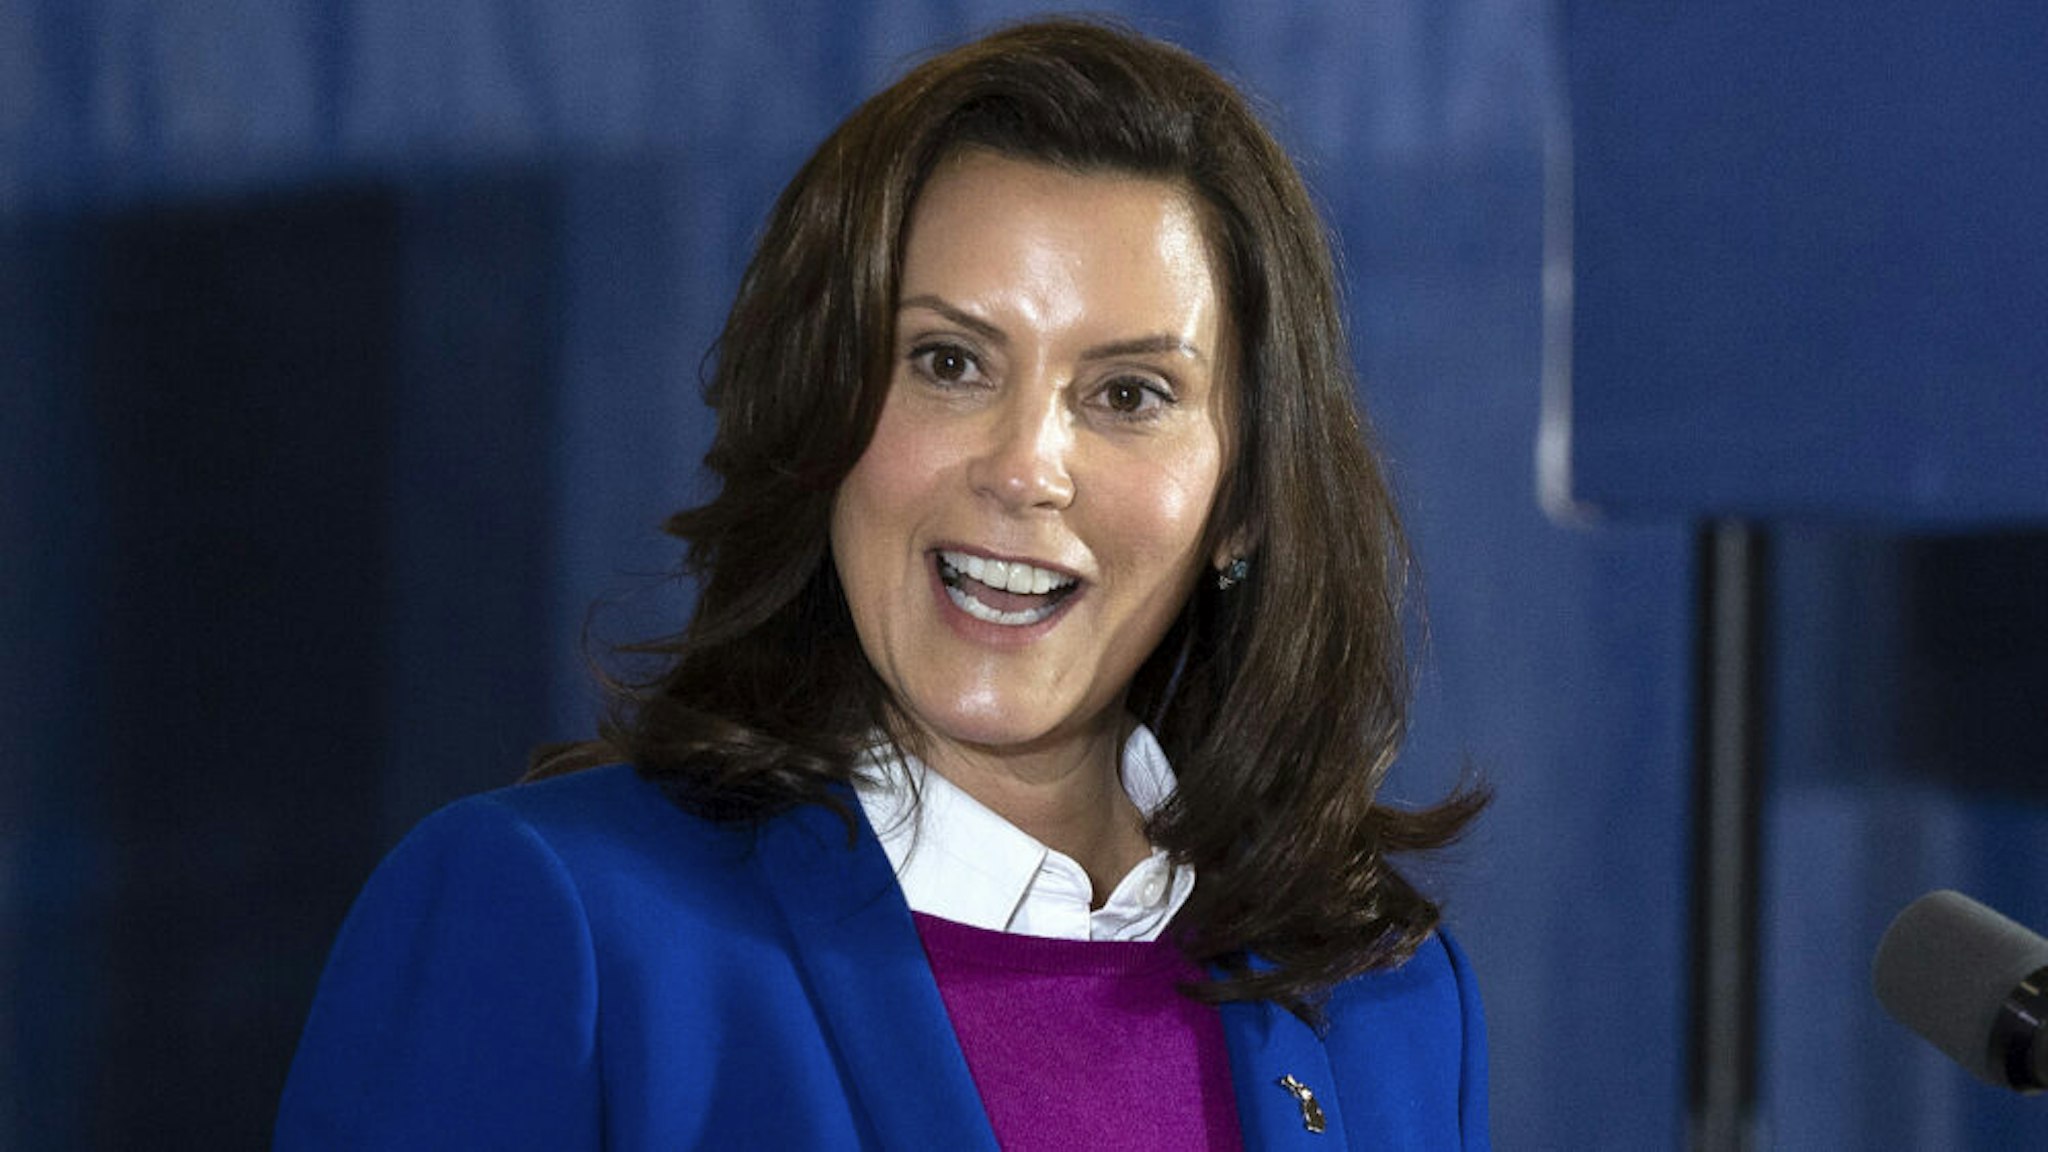 Michigan Governor Gretchen Whitmer introduces Democratic Presidential Candidate Joe Biden to speak at Beech Woods Recreation Center in Southfield, Michigan, on October 16, 2020. - Joe Biden on October 16, 2020 described President Donald Trump's reluctance to denounce white supremacists as "stunning" in a hard-hitting speech in battleground Michigan with 18 days to go until the election.